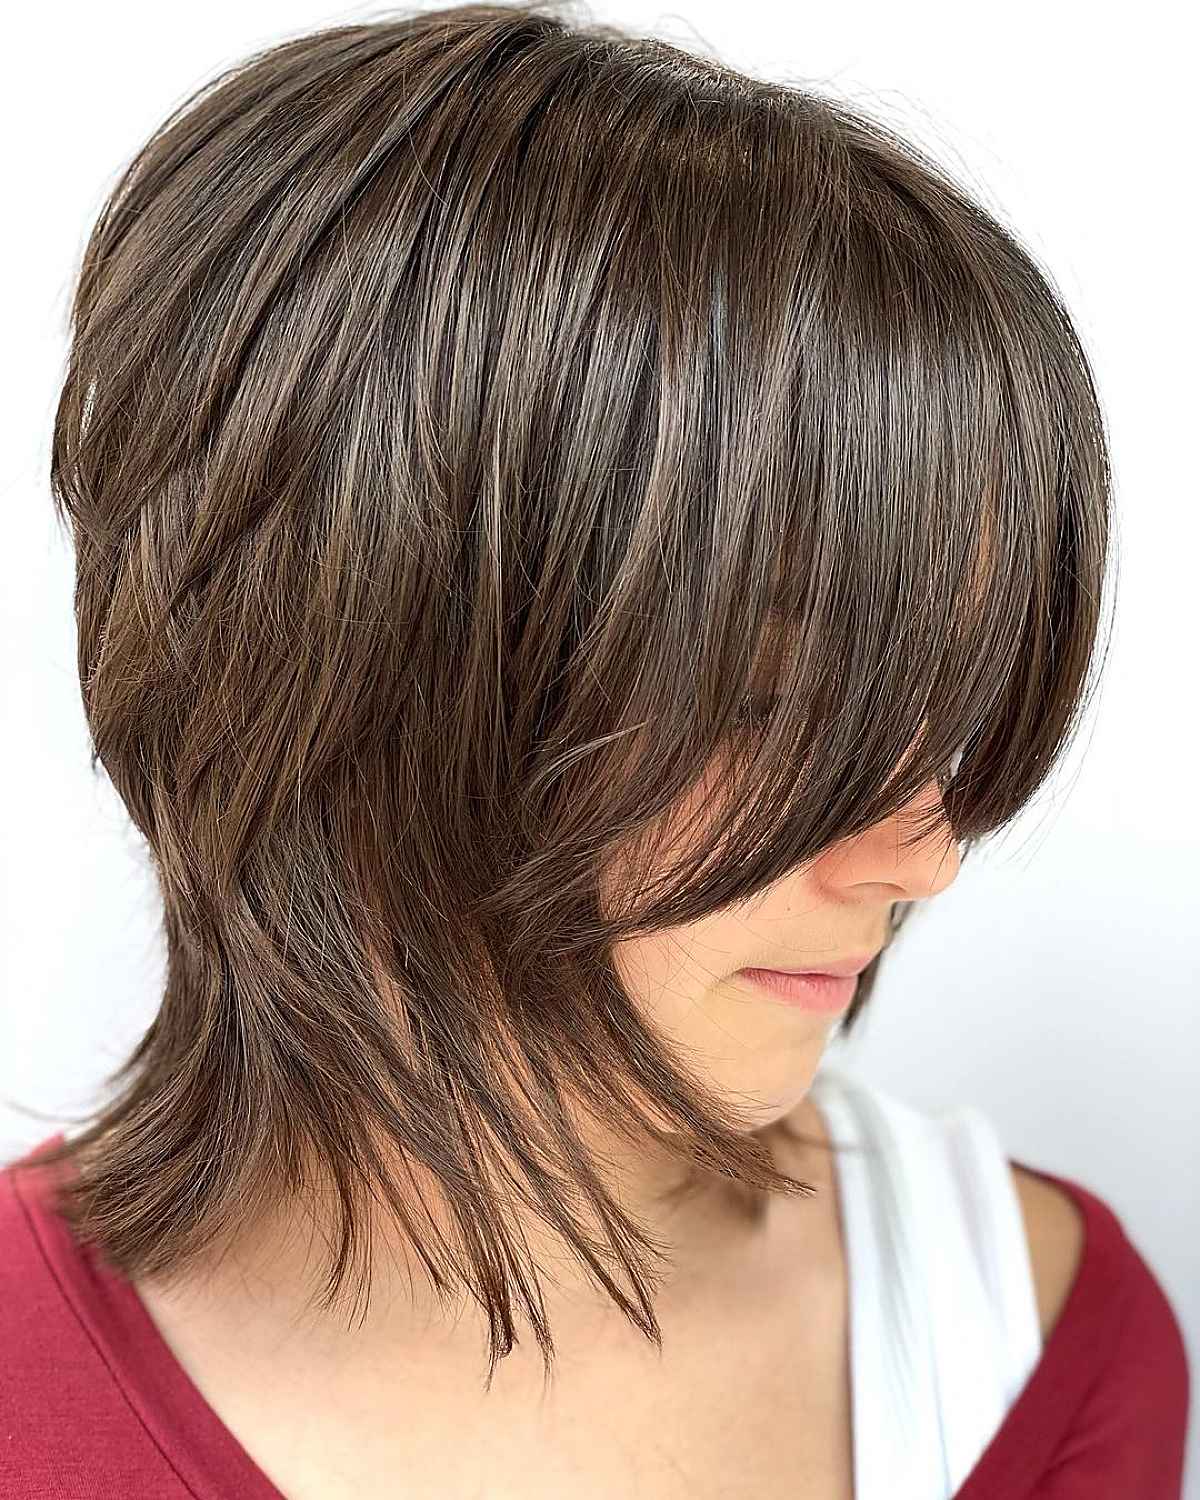 Ultra-Cool Feathered Cut for Girls